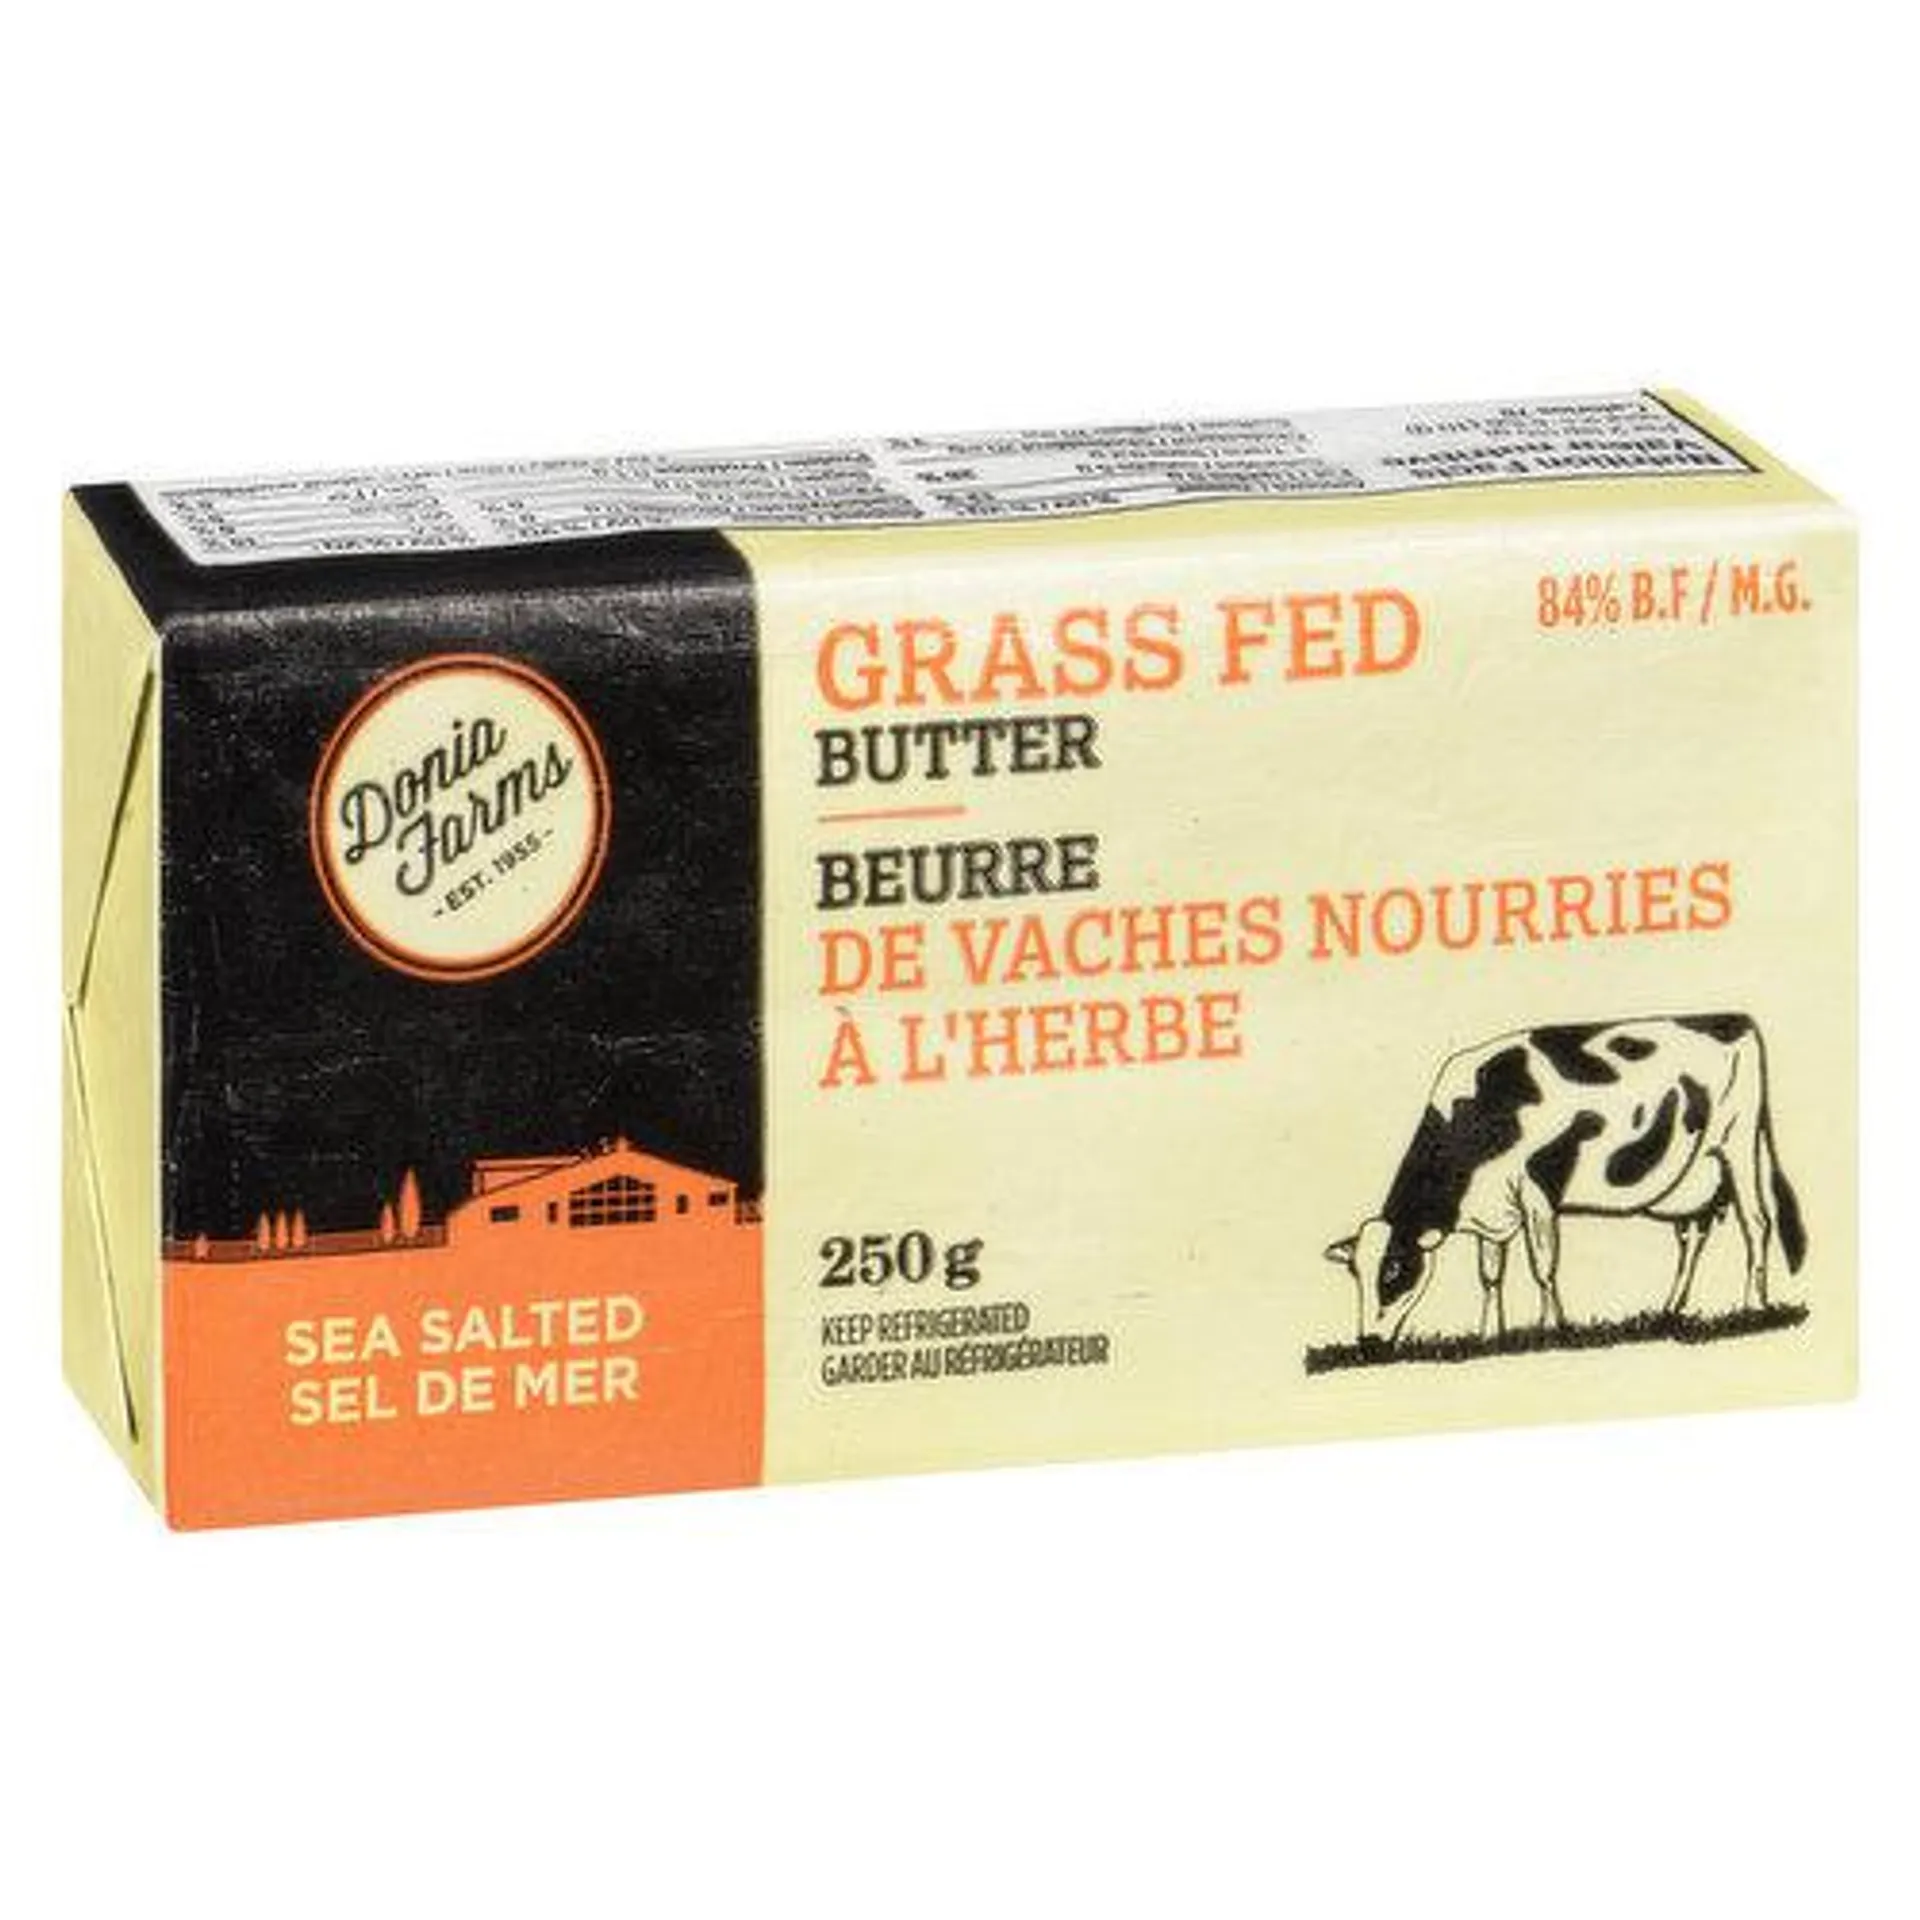 Donia Farms - Grass Fed Butter - Sea Salted, 250 Gram